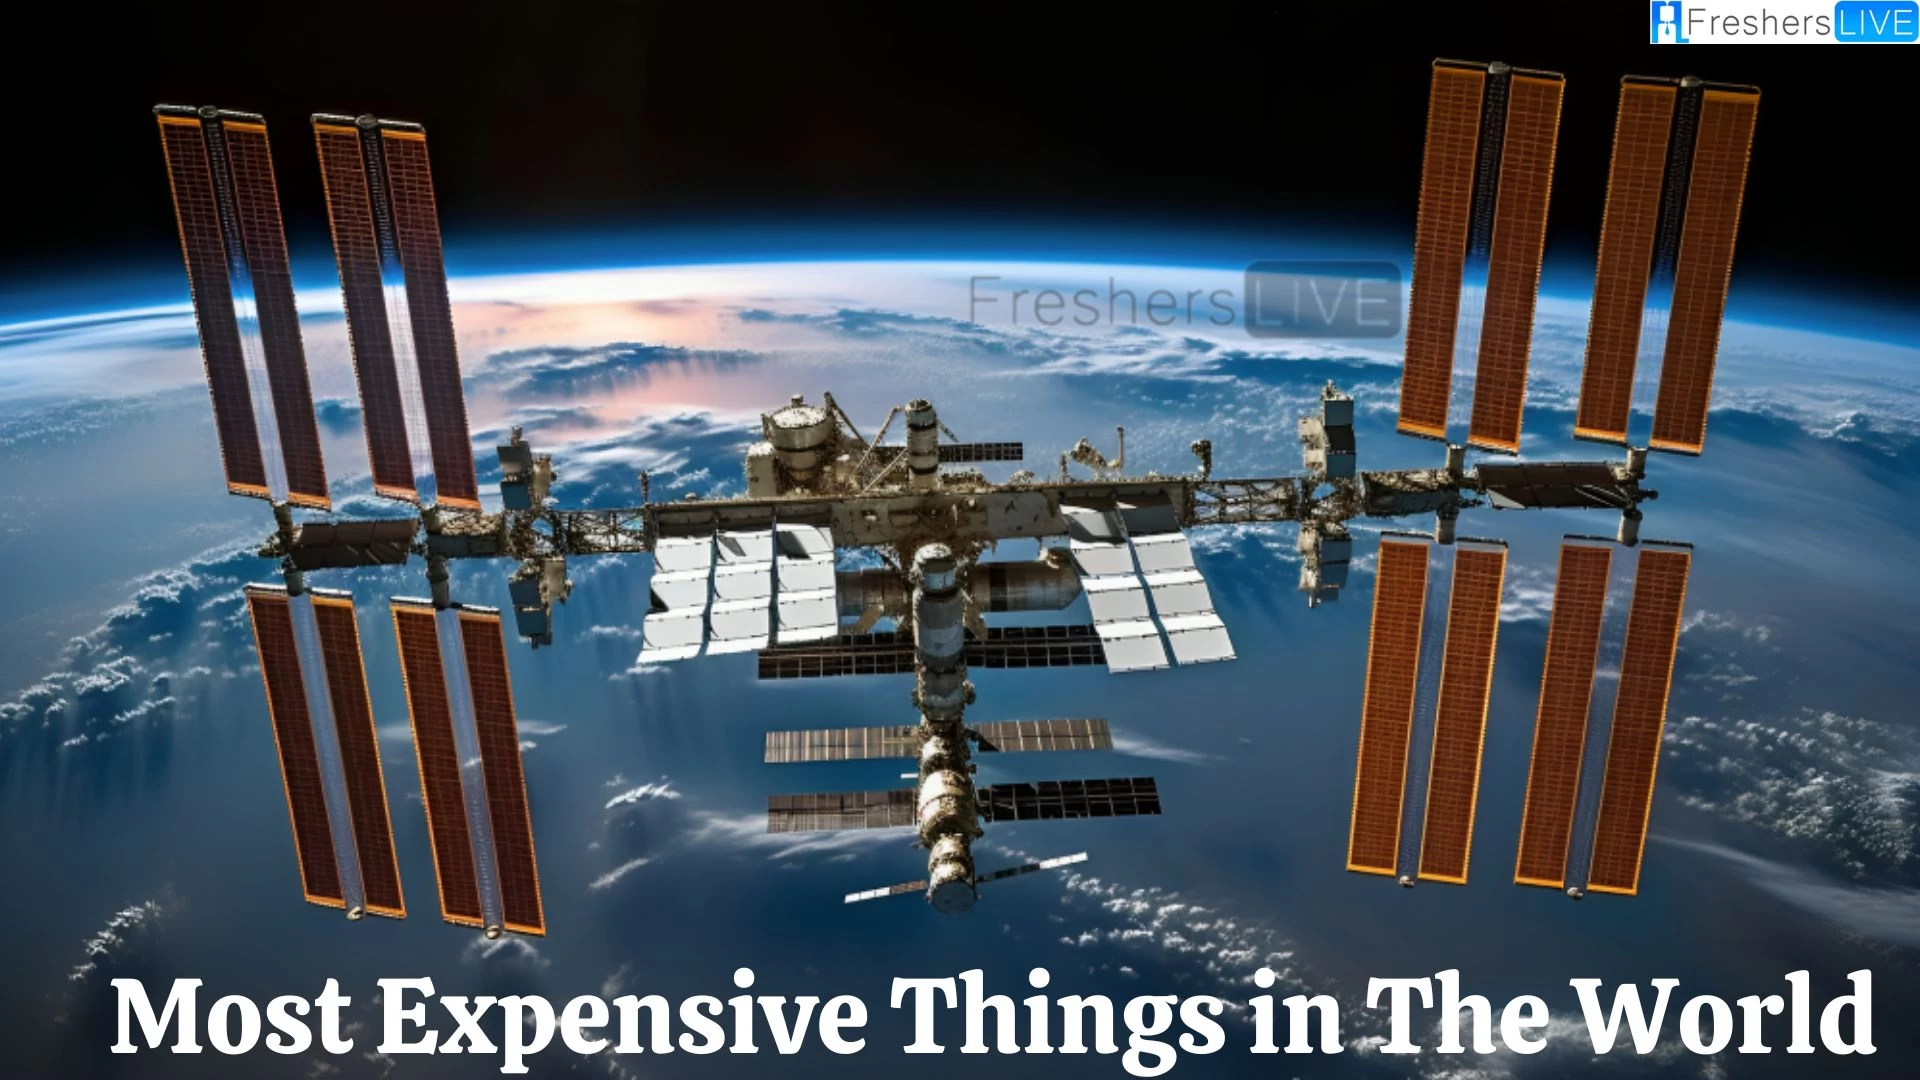 Most Expensive Things in the World - Top 10 Listed